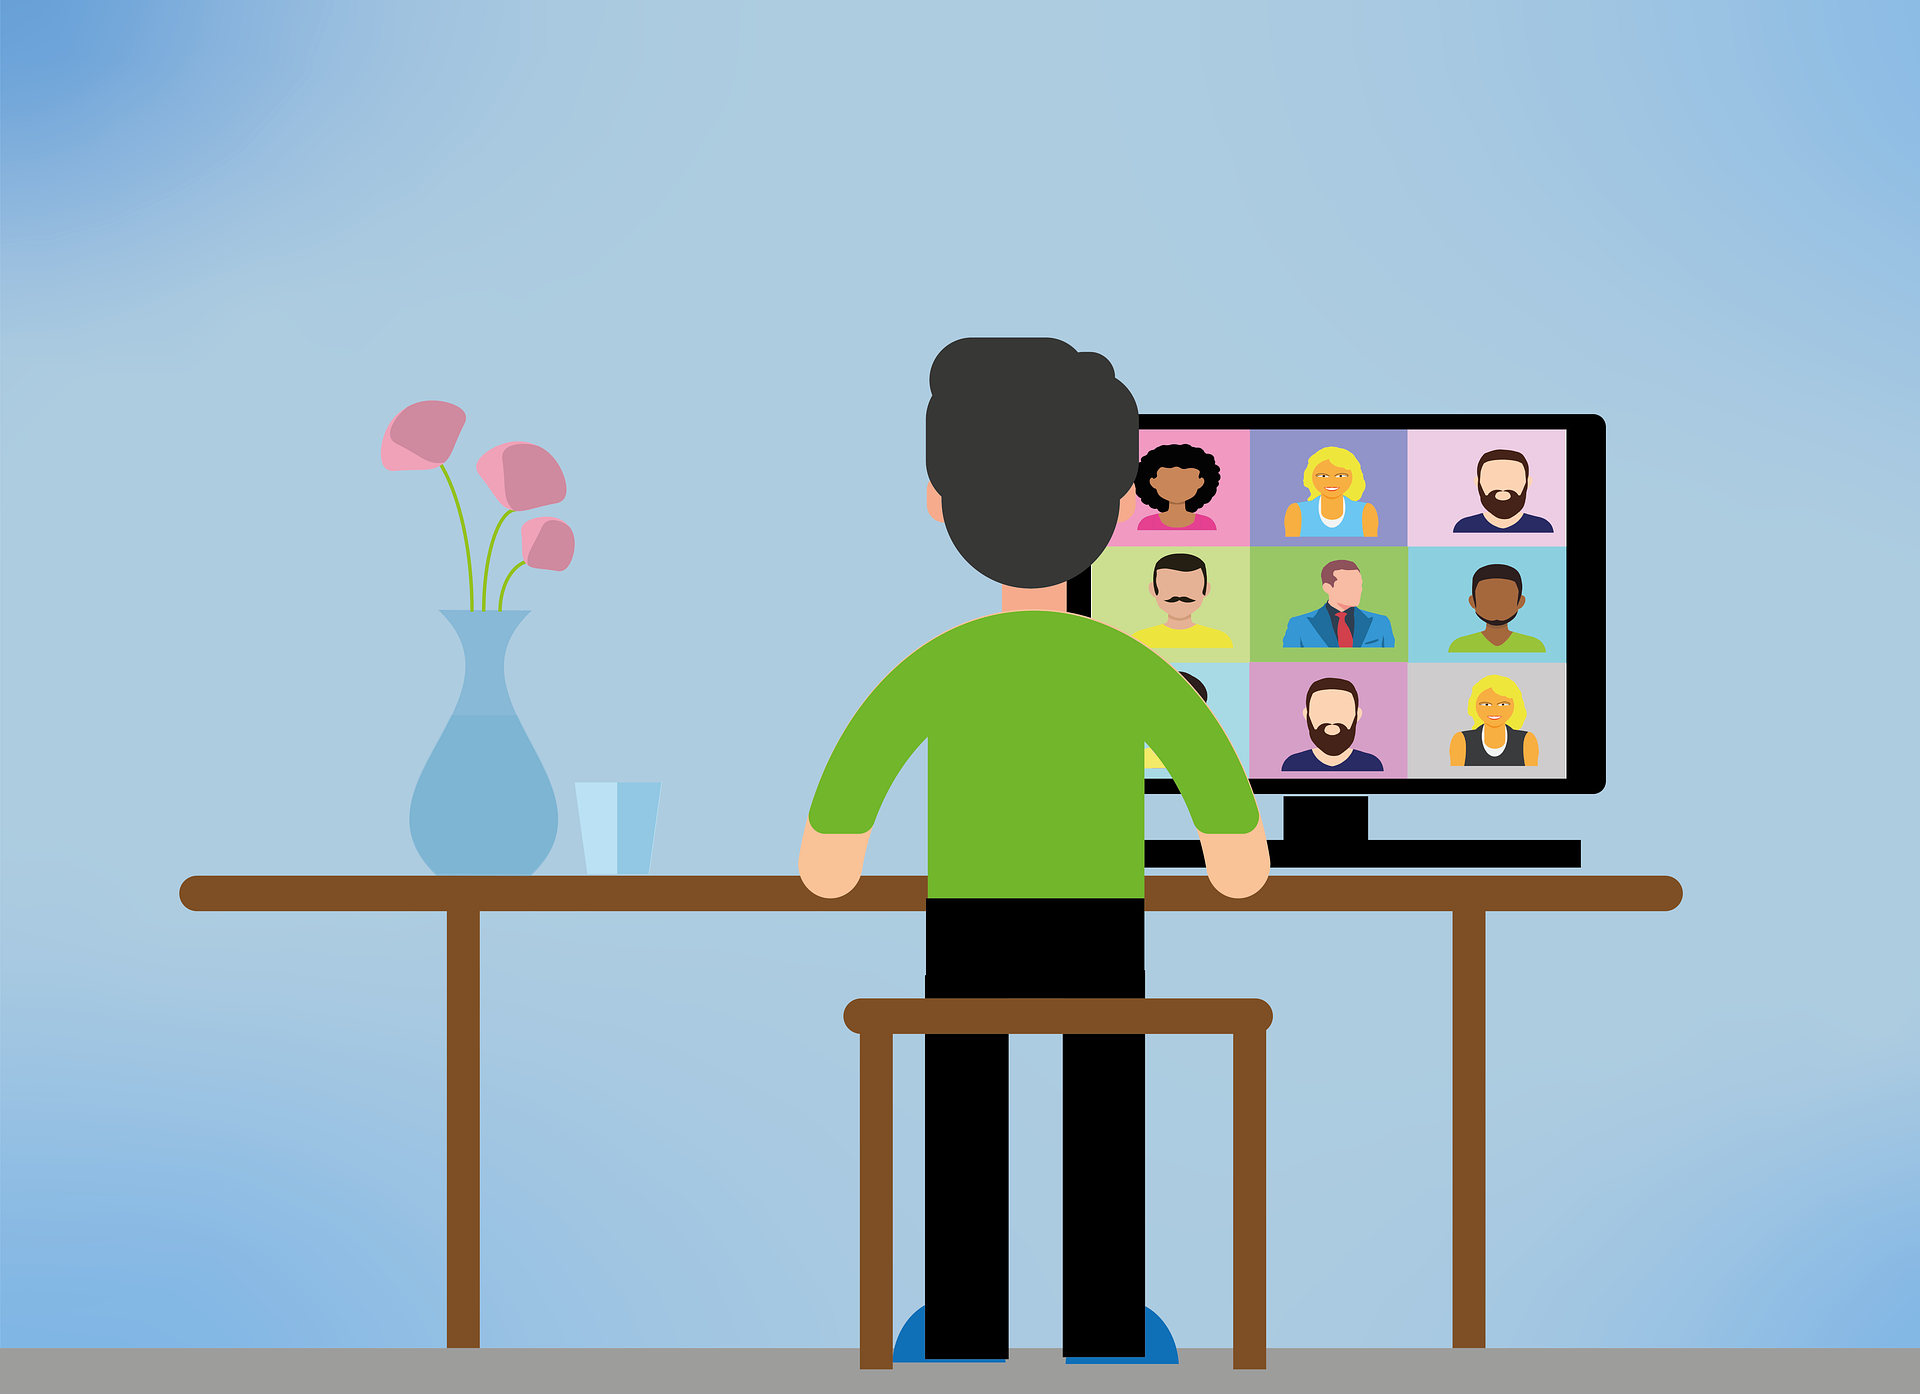 Illustration shows a man standing at a desk there is a video conference represented on his screen